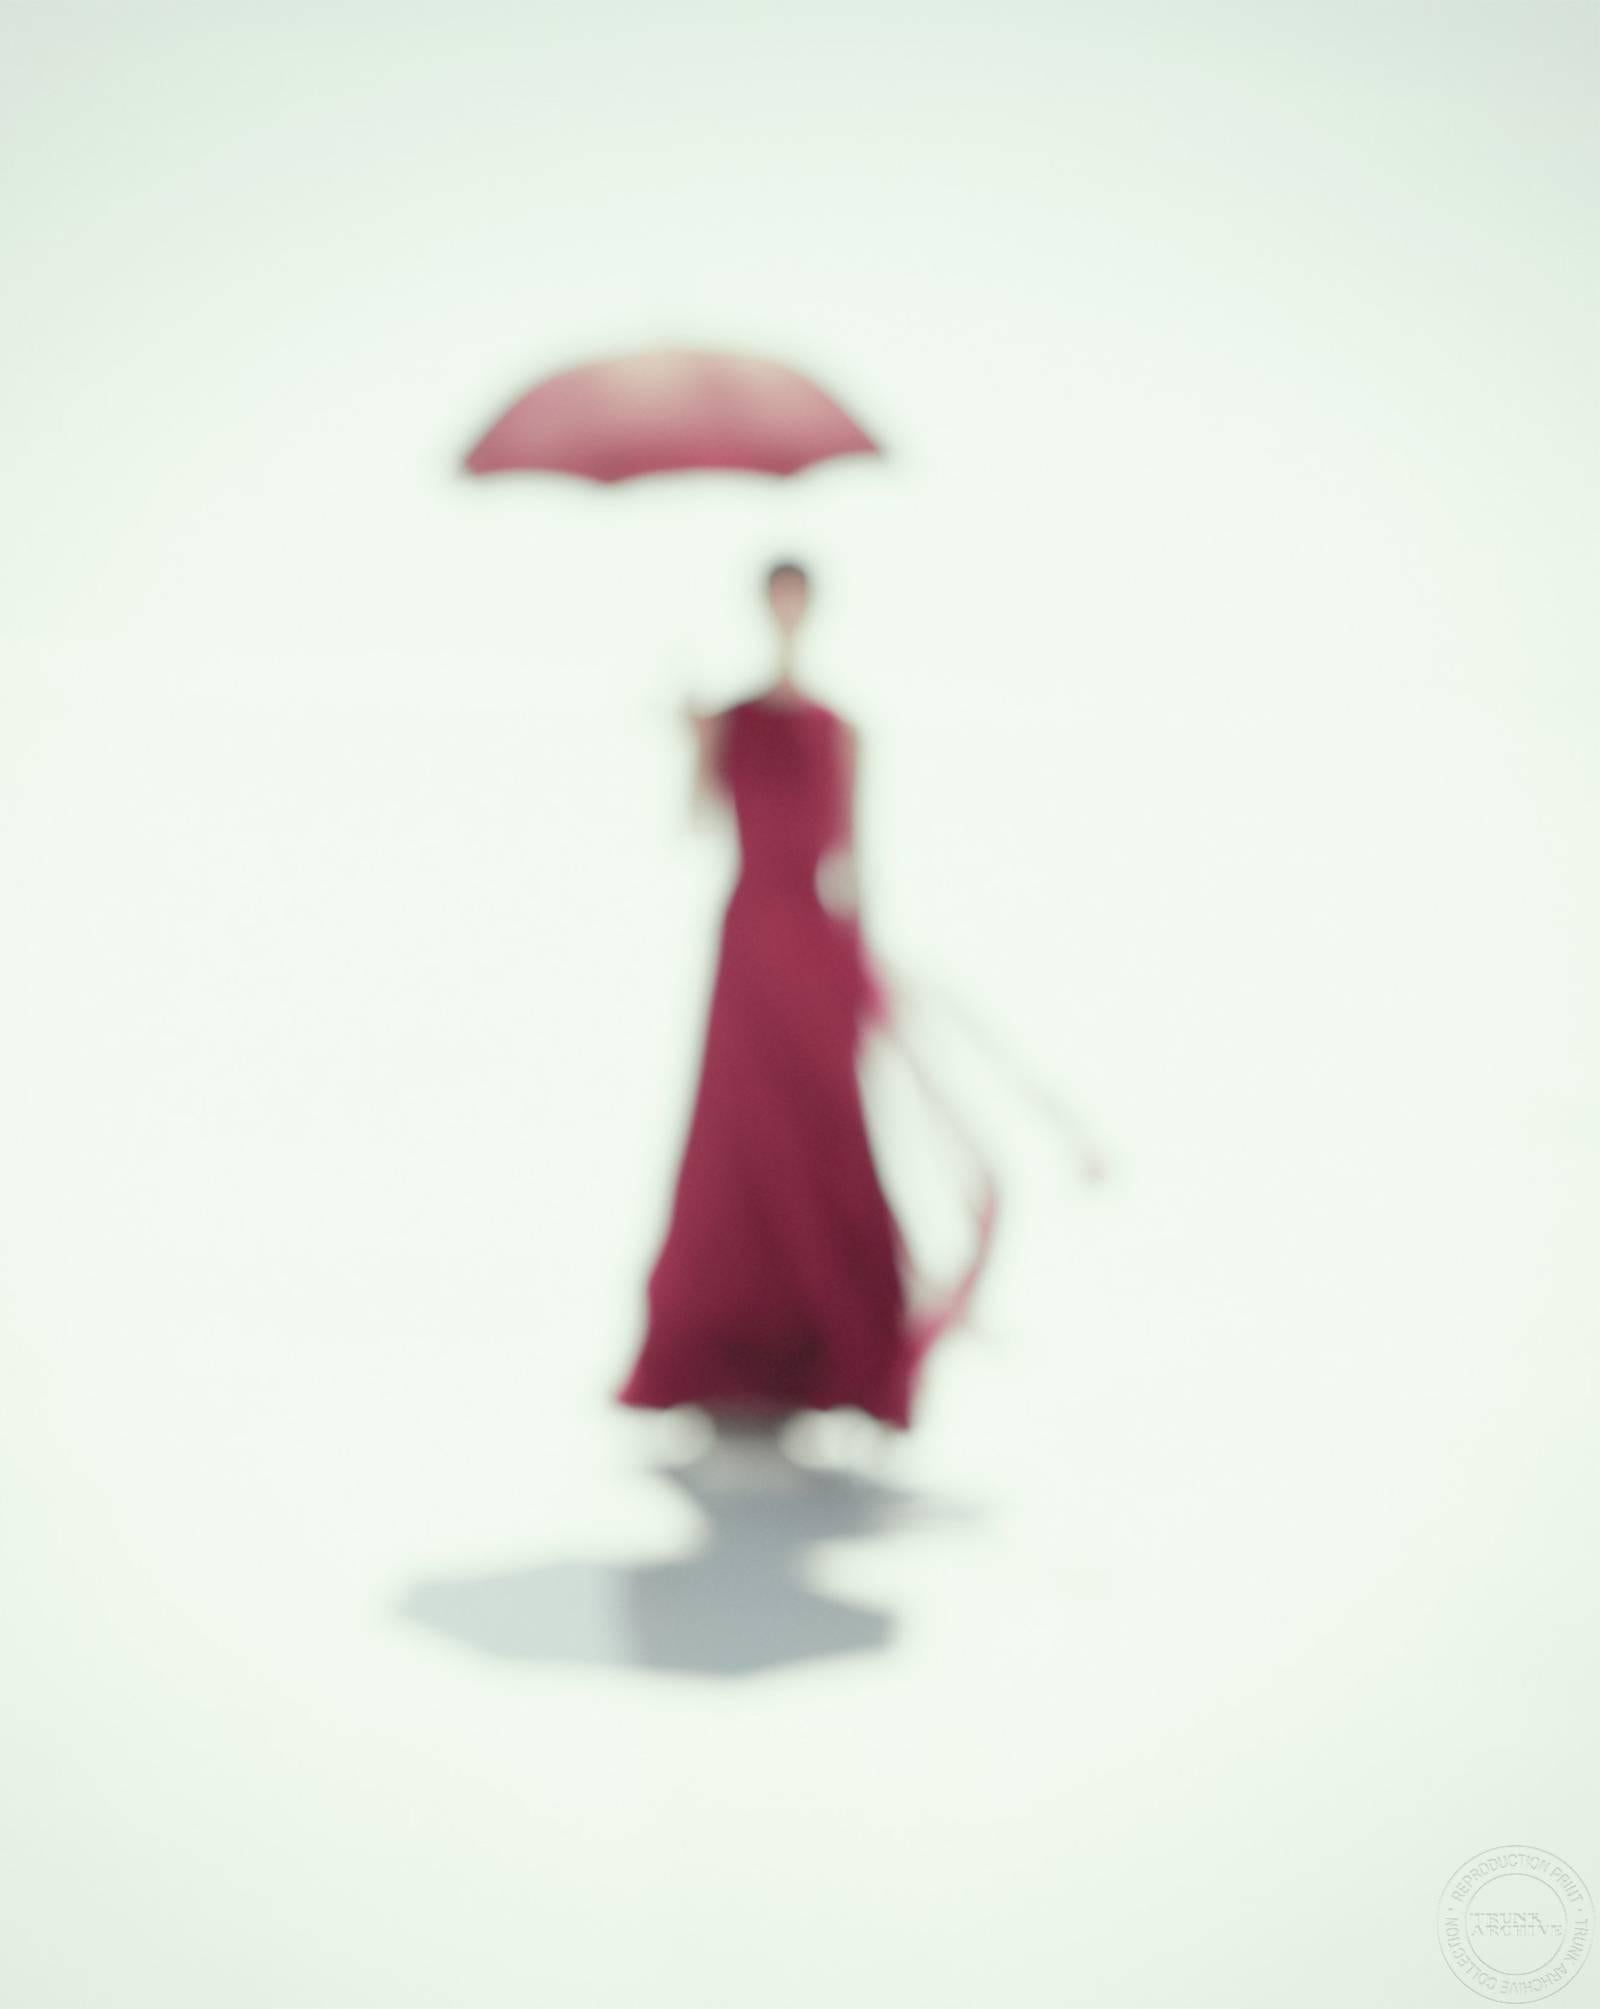 Alistair Taylor-Young Color Photograph - Fashion Portrait (Red Umbrella)